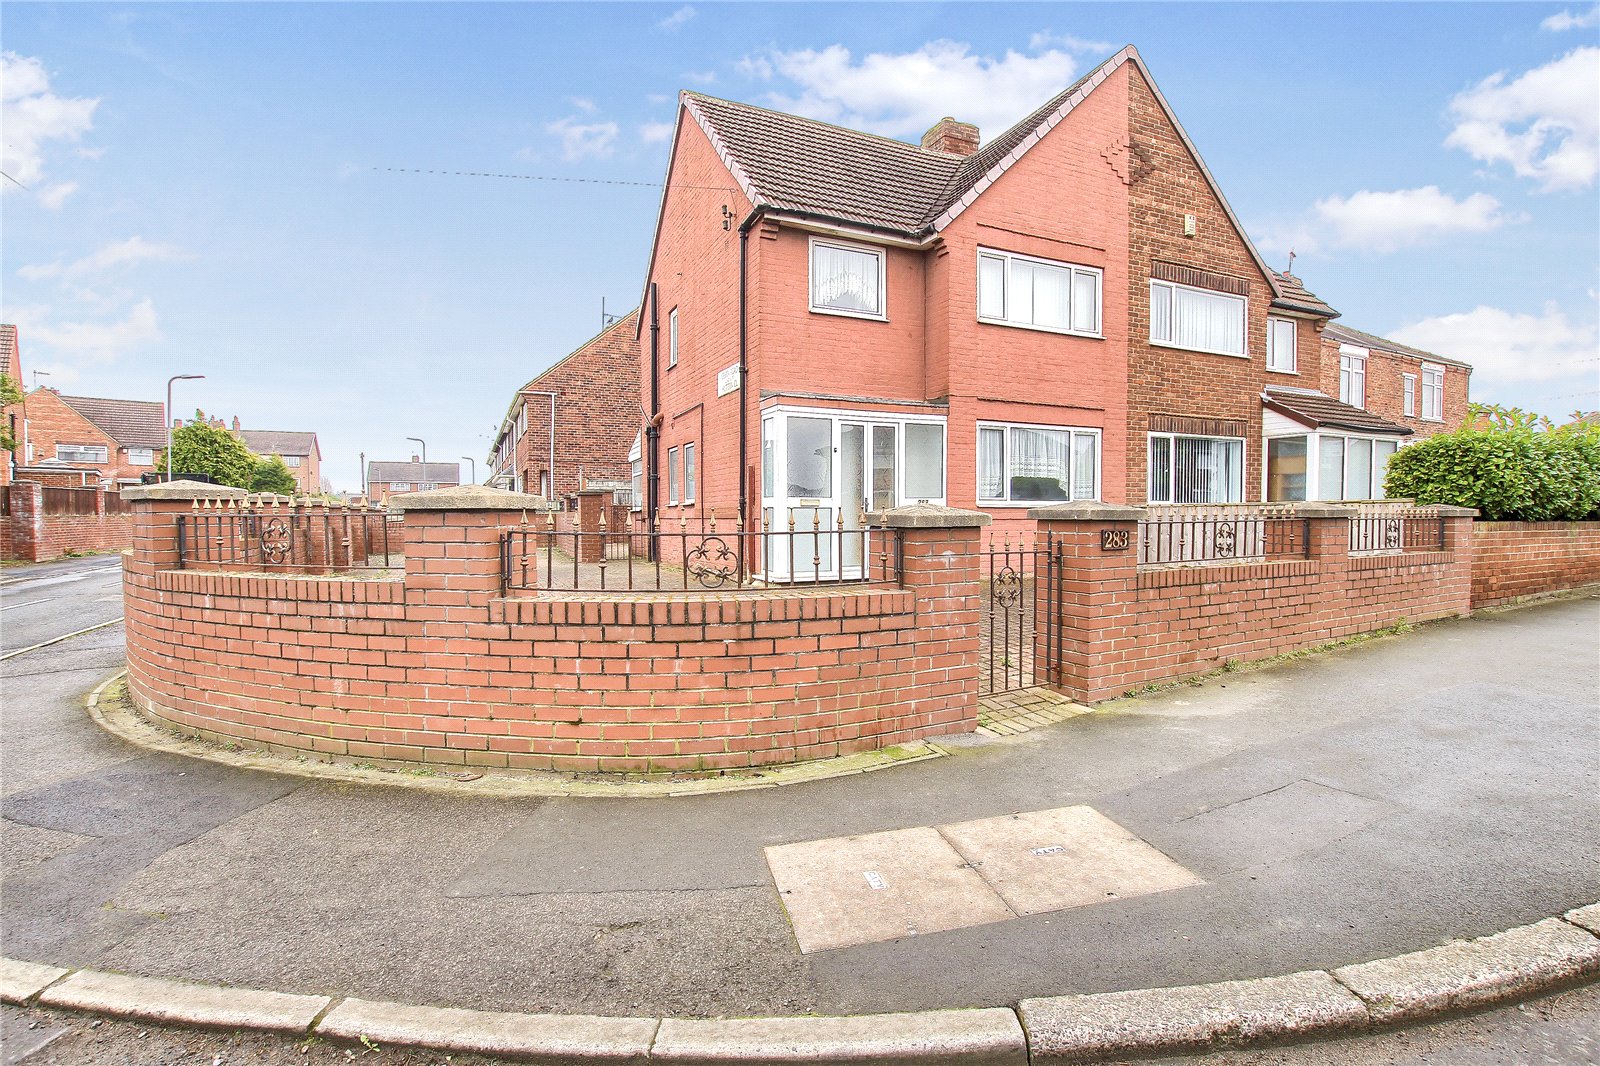 3 bed house for sale in Thornaby Road, Thornaby  - Property Image 1